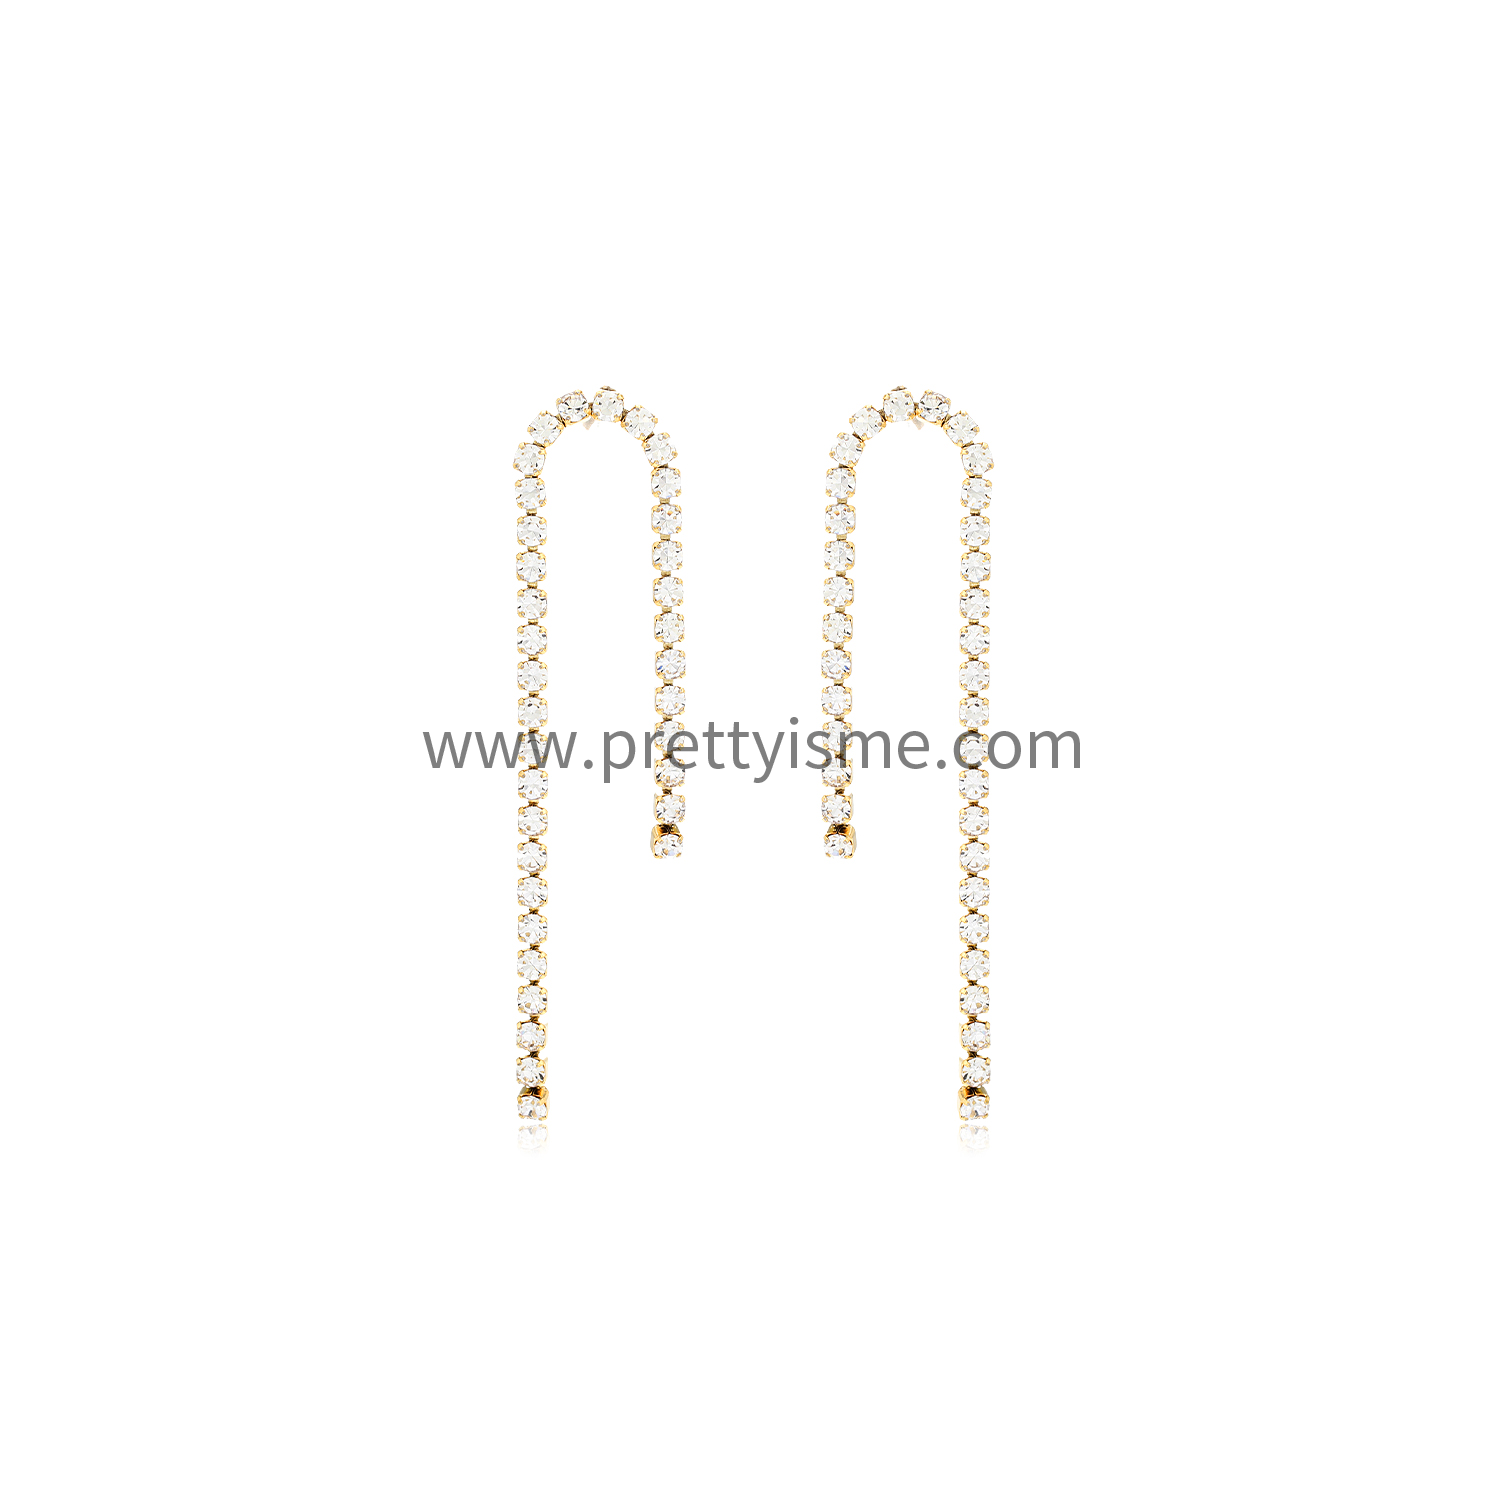 Pretty Is Me Collection Fashion 18K Gold Plated 316L Stainless Steel Crystal Diamond Rhinstone Tennis Chain Drop Earrings Women (7).webp